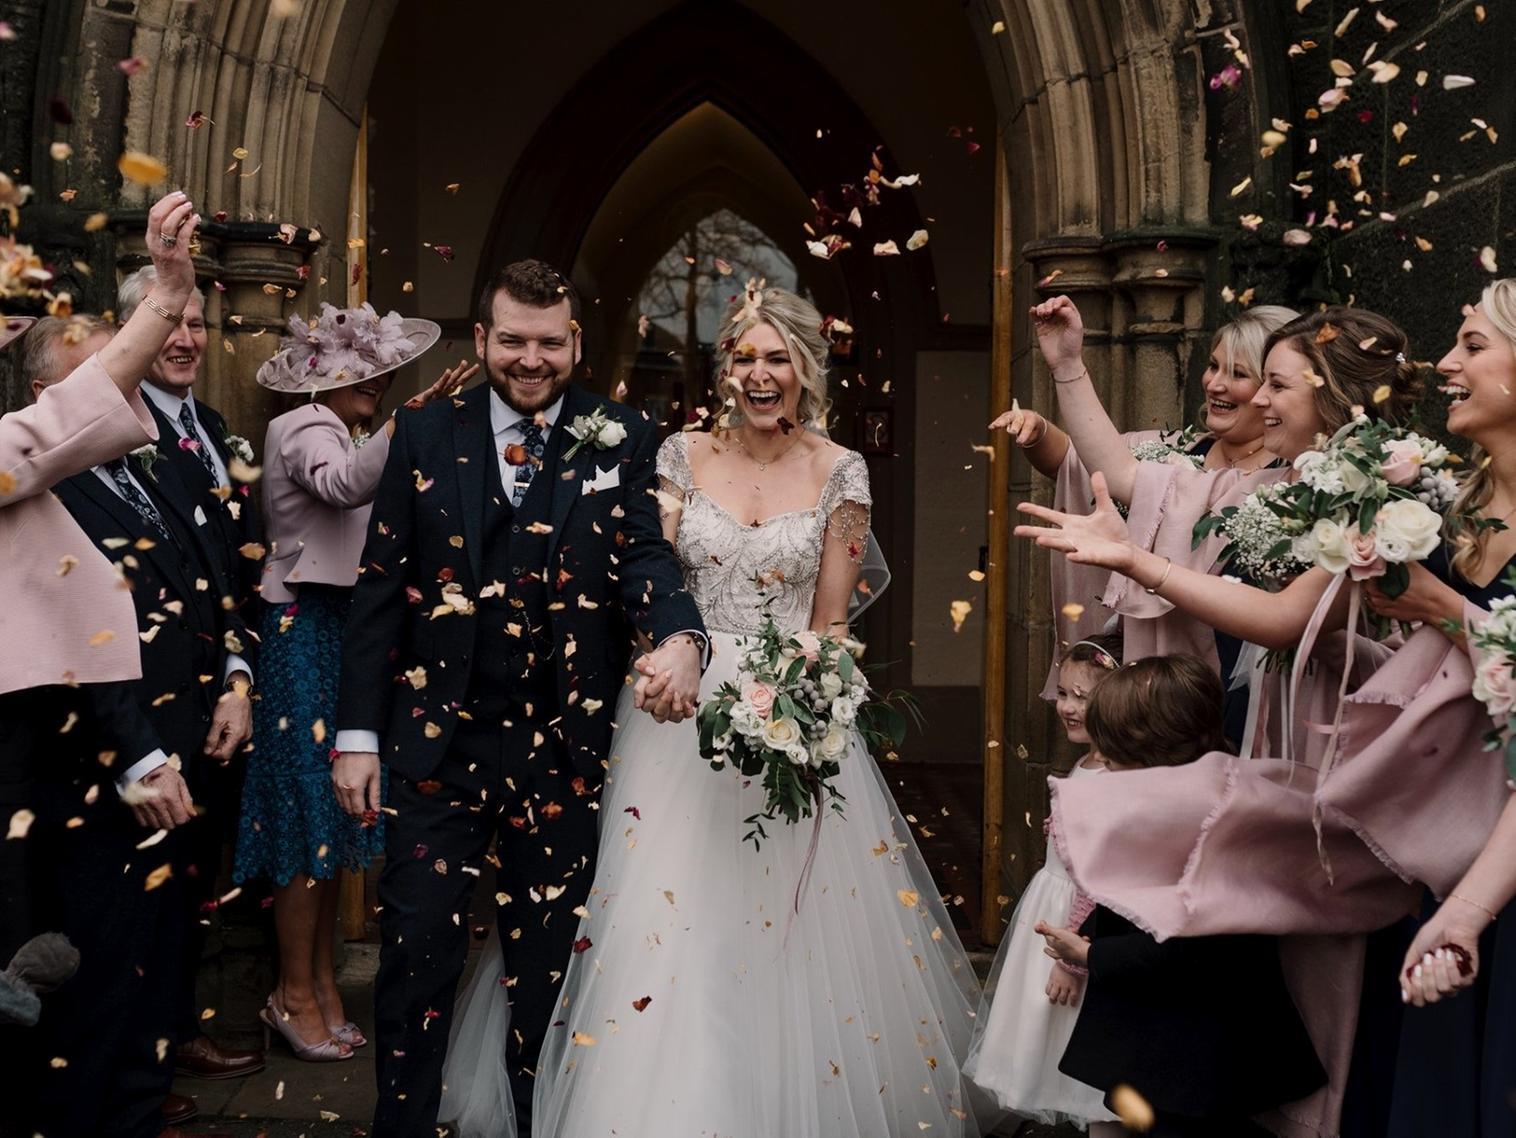 She walked down the aisle to the traditional wedding march, something she had always dreamed of and they aptly listened to Auld Lang Syne during the signing of the register.